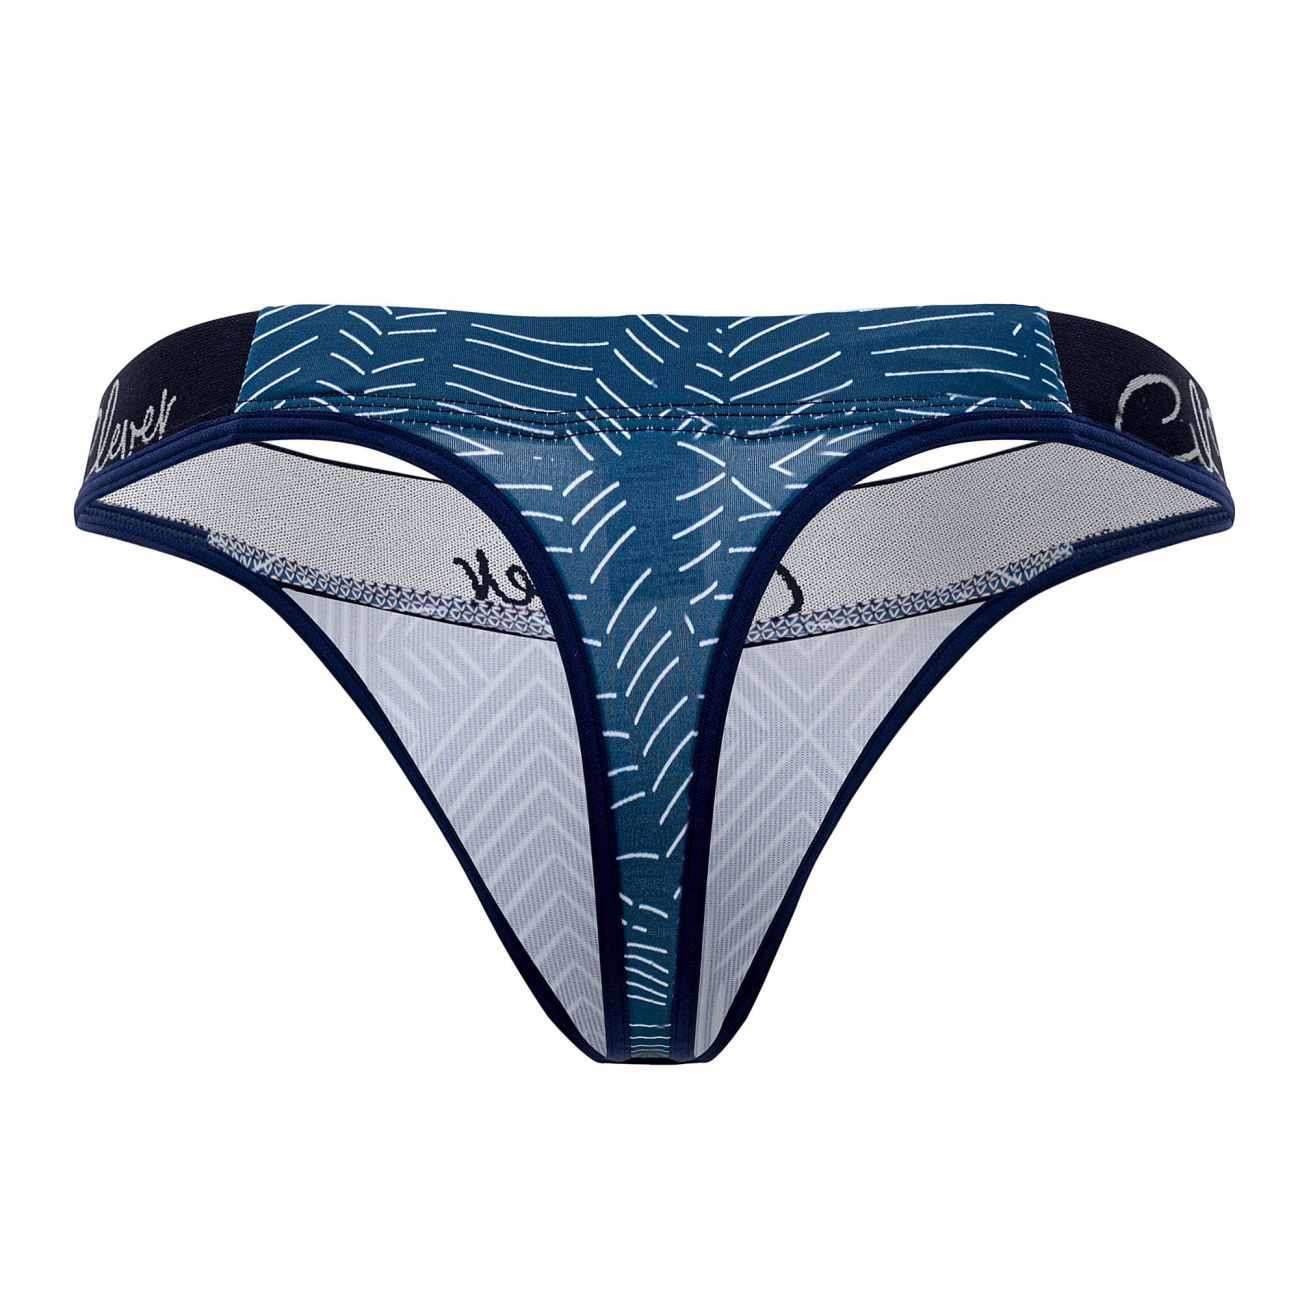 Clever 1416 Lush Thongs